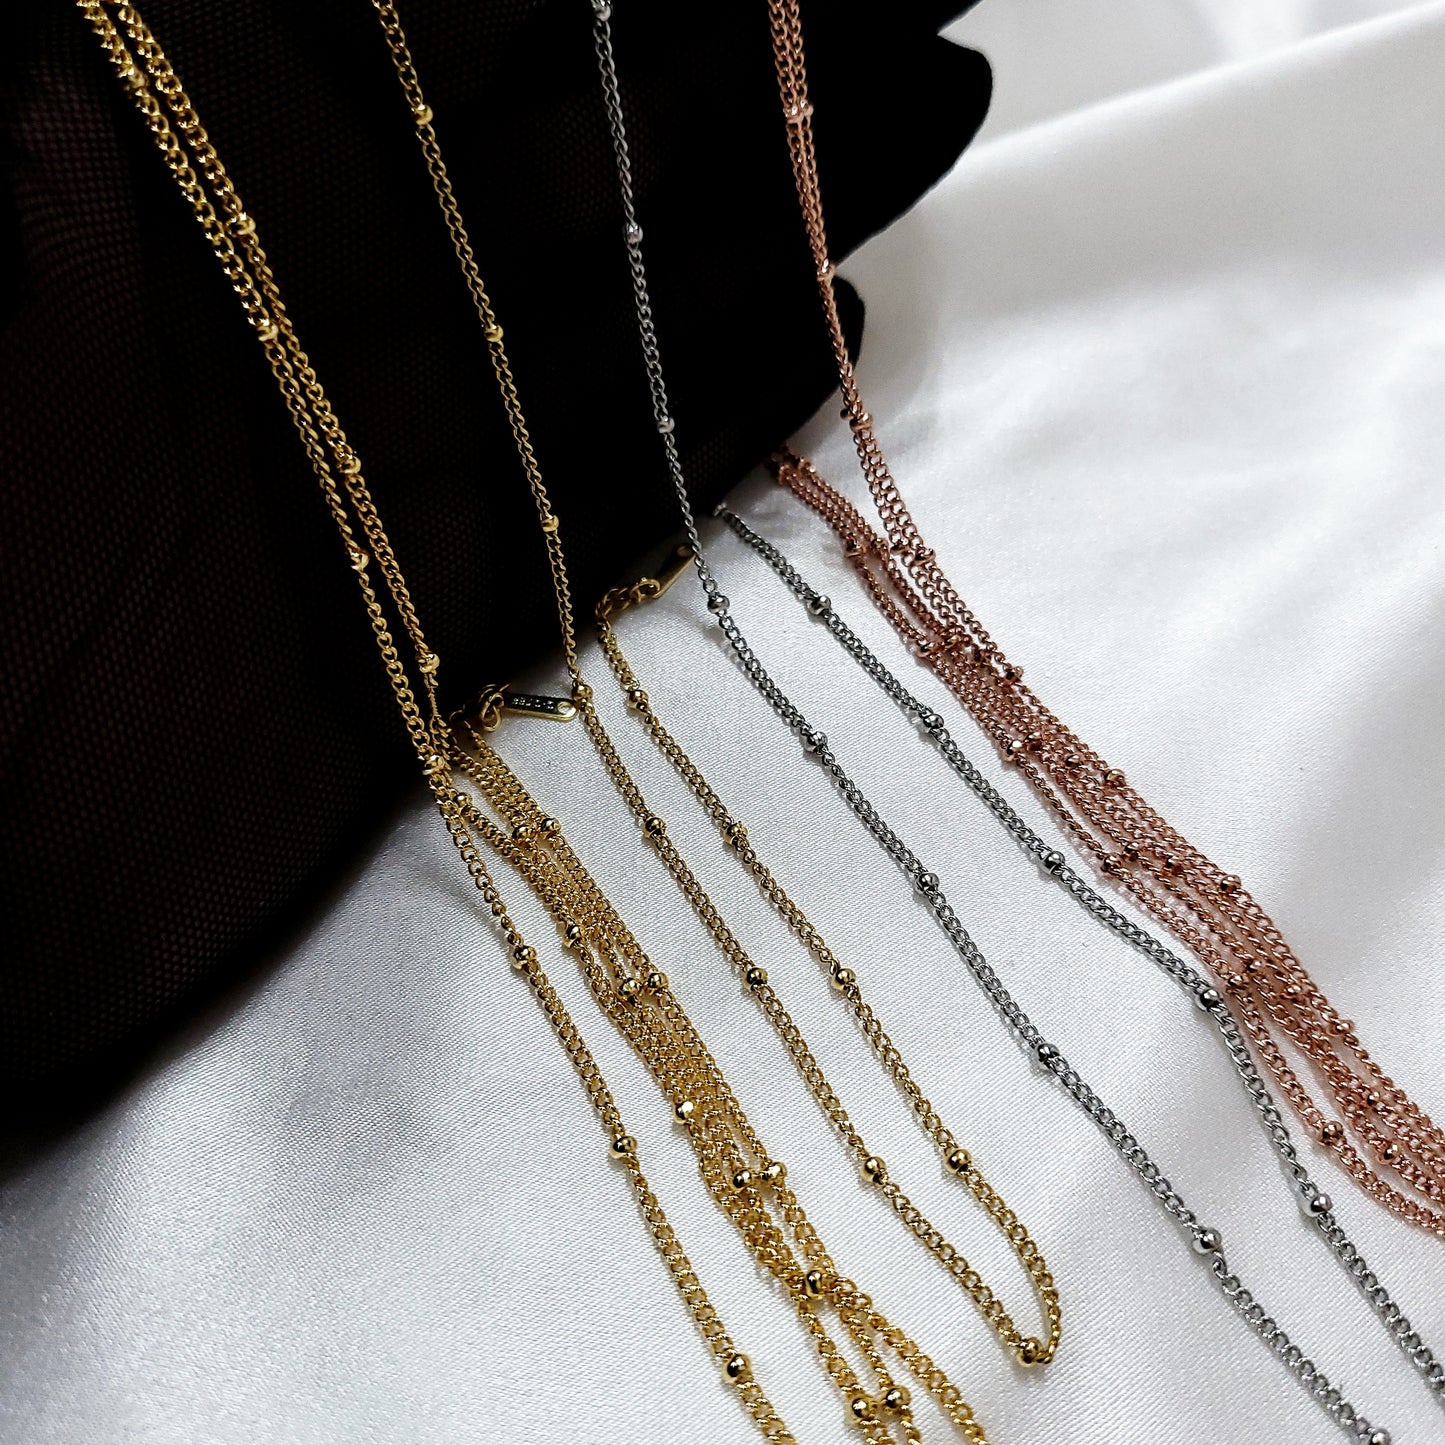 Saturn Beaded Chain Necklace - Choker to Hijab length - Jewellery Everyday Essentials gifts - NIKKI - PREORDER